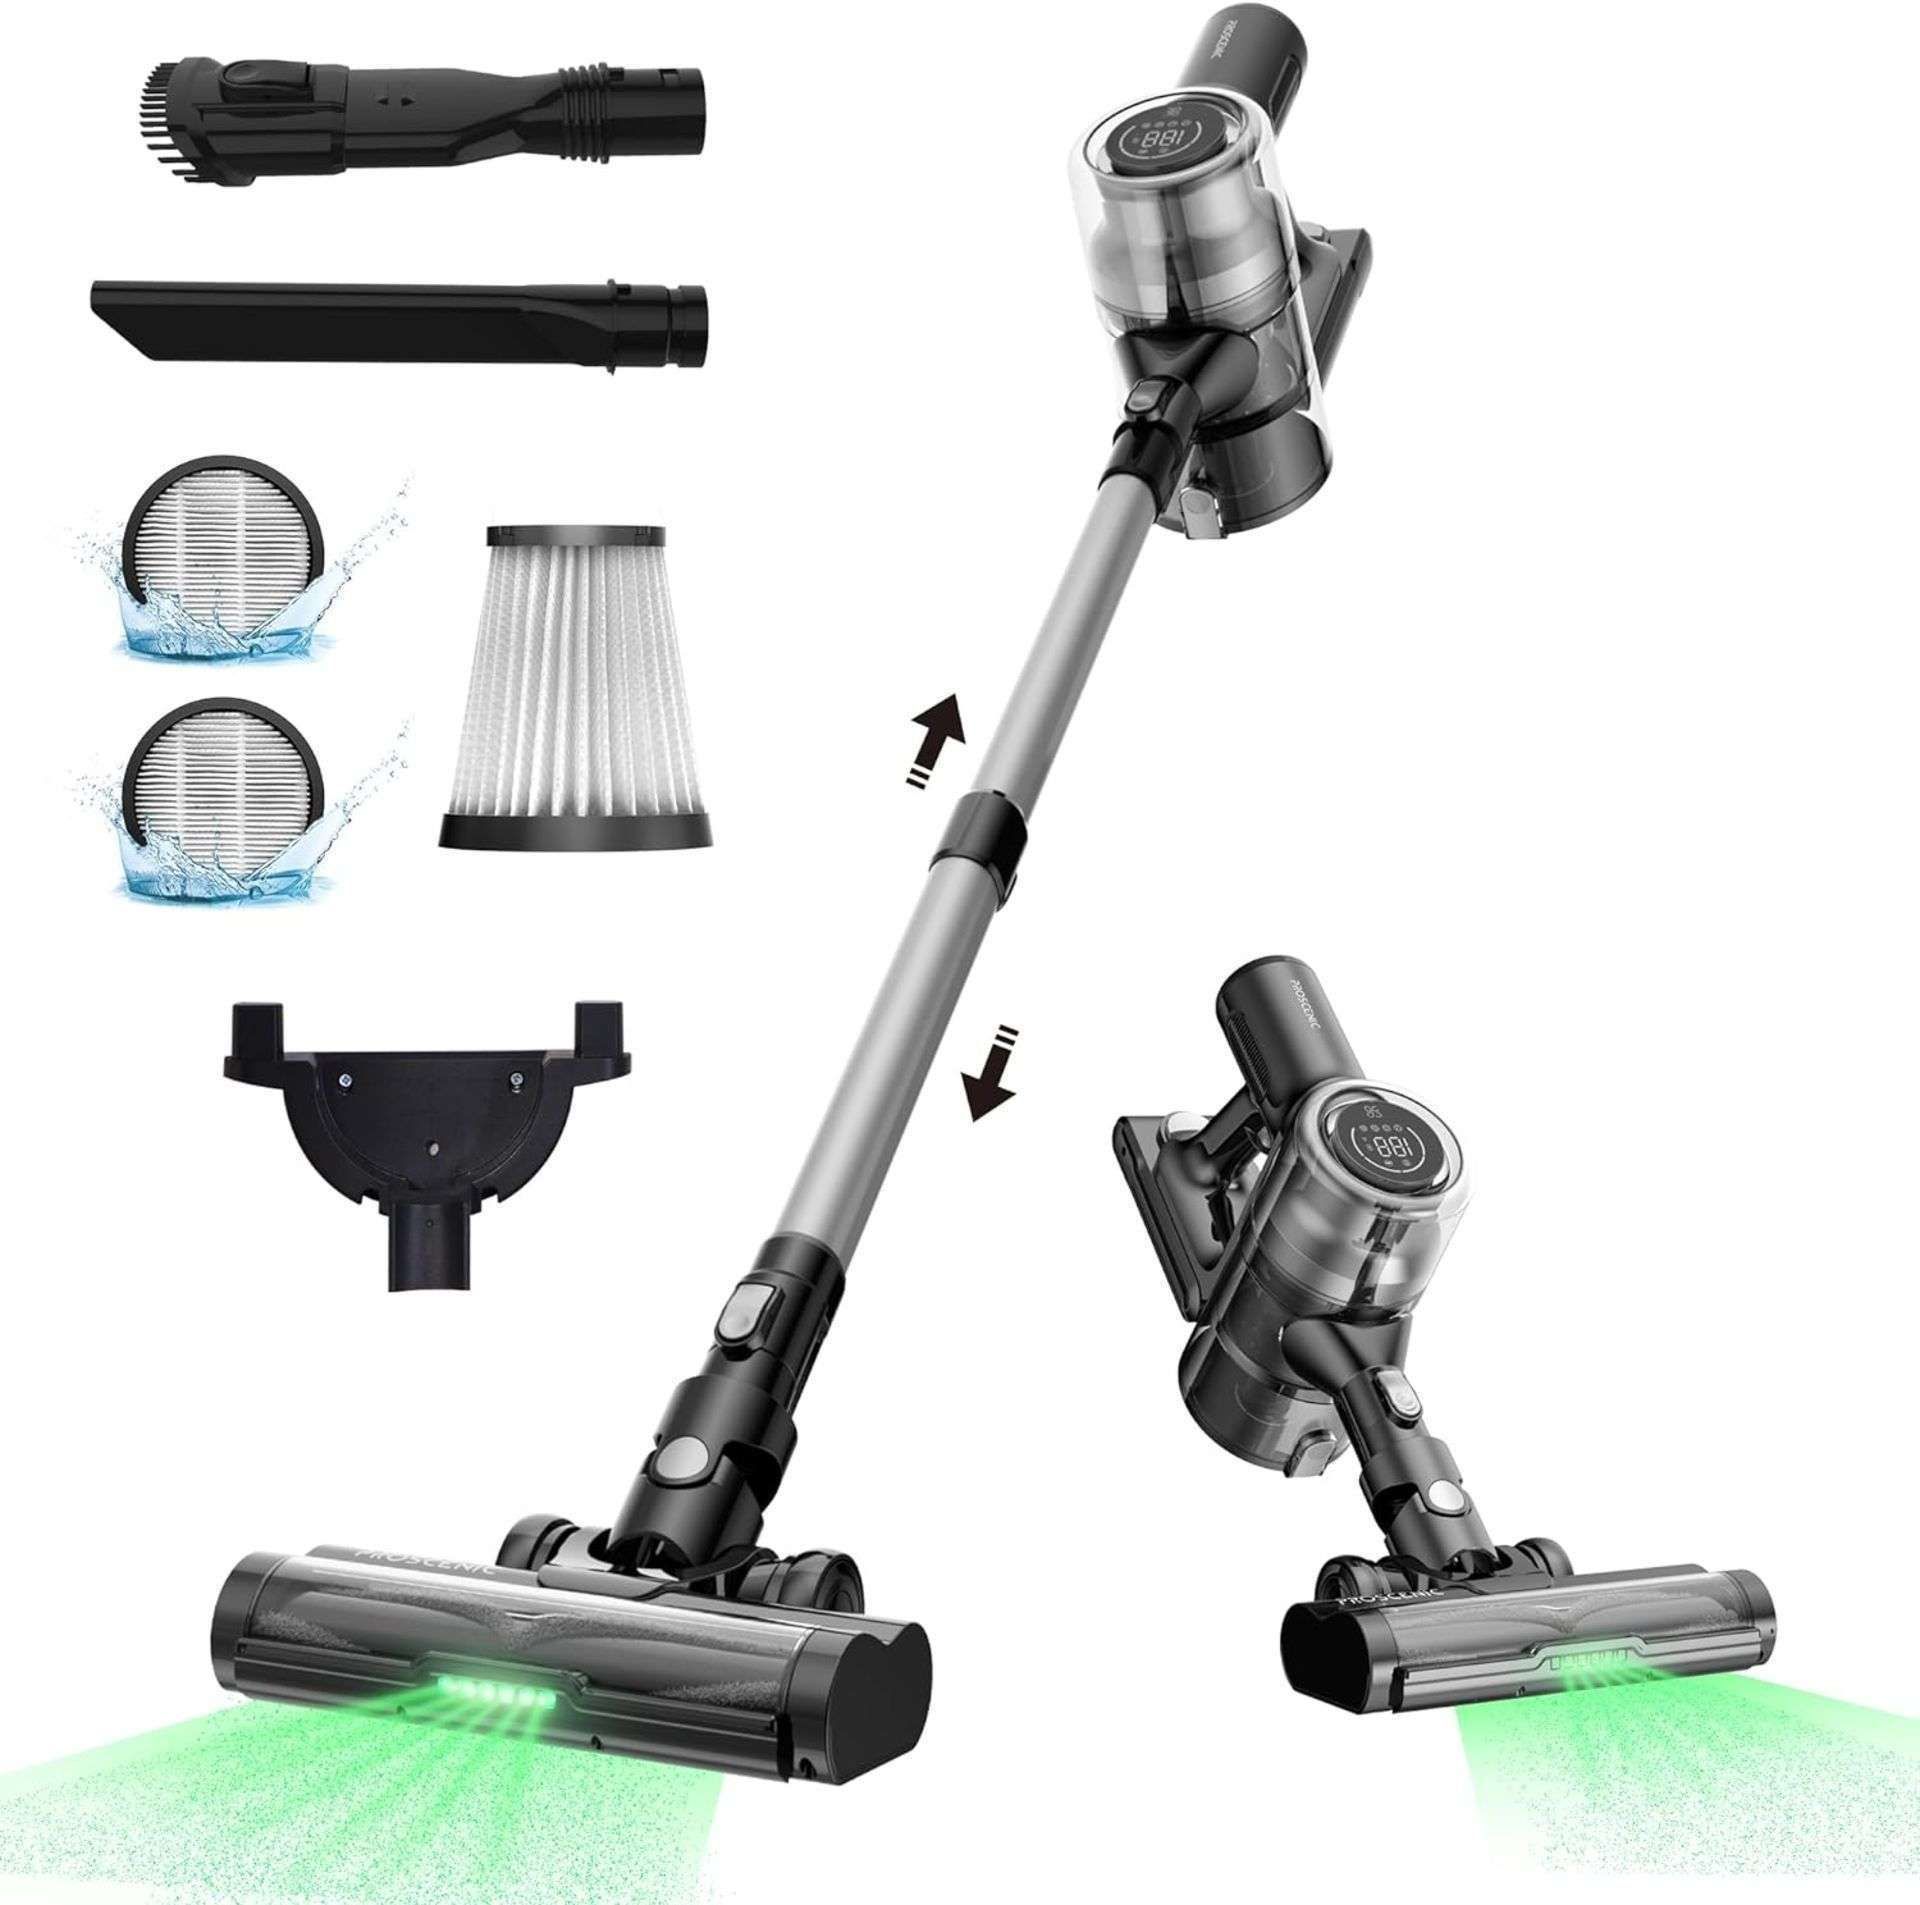 New & Boxed Proscenic P12 Cordless Vacuum Cleaner, 33Kpa Stick Vacuum Cleaner with Touch Display,